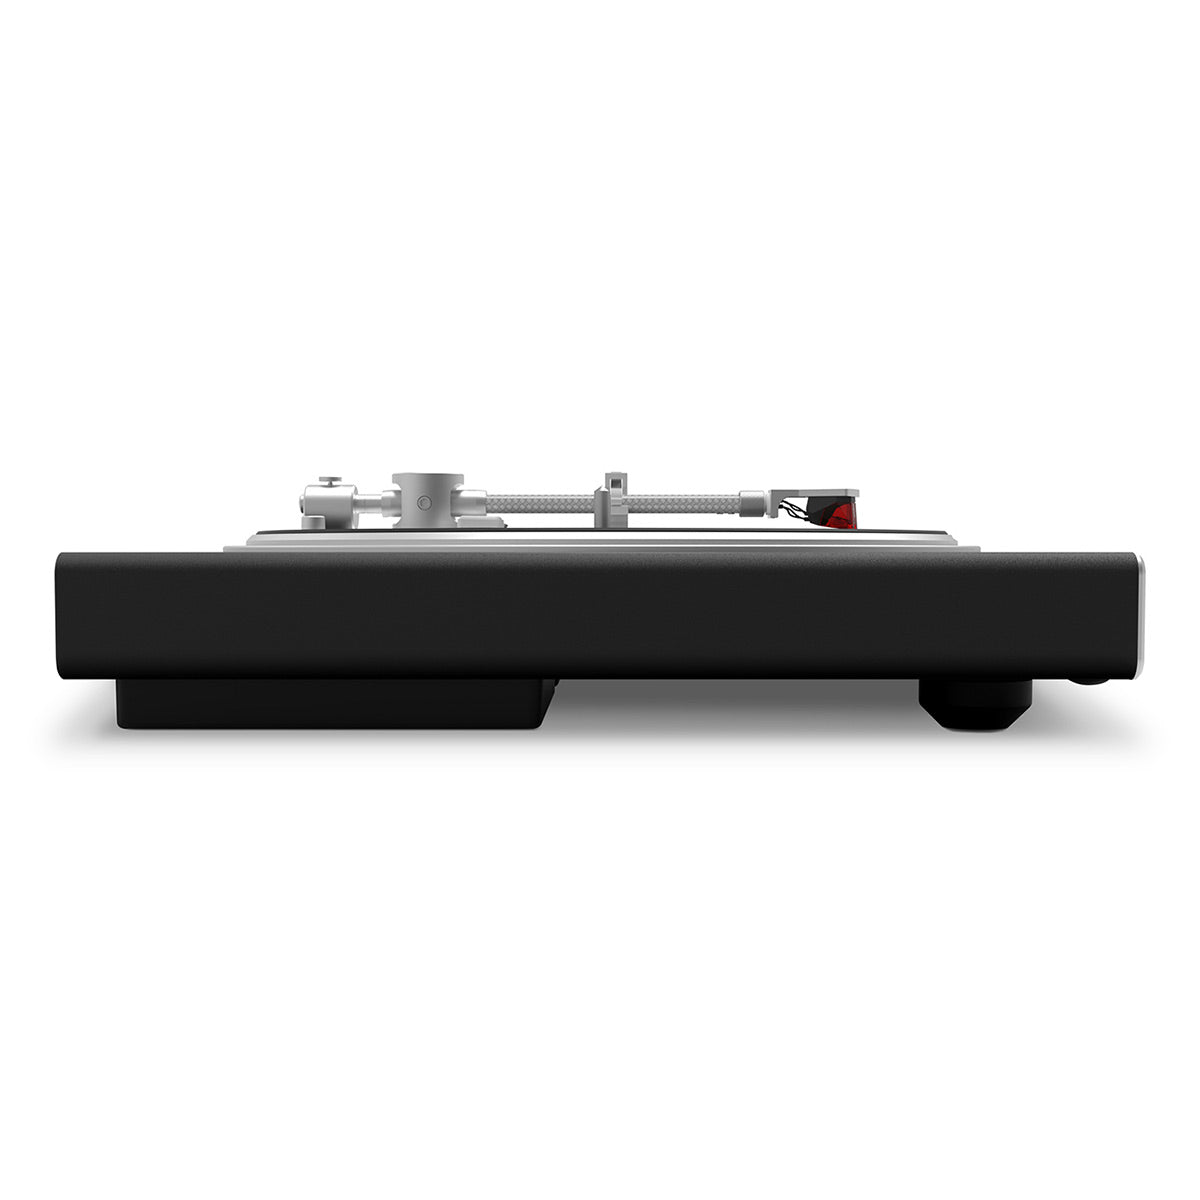 Victrola Hi-Res Carbon Bluetooth Turntable with aptX Adaptive Audio and Ortofon 2M Red Cartridge